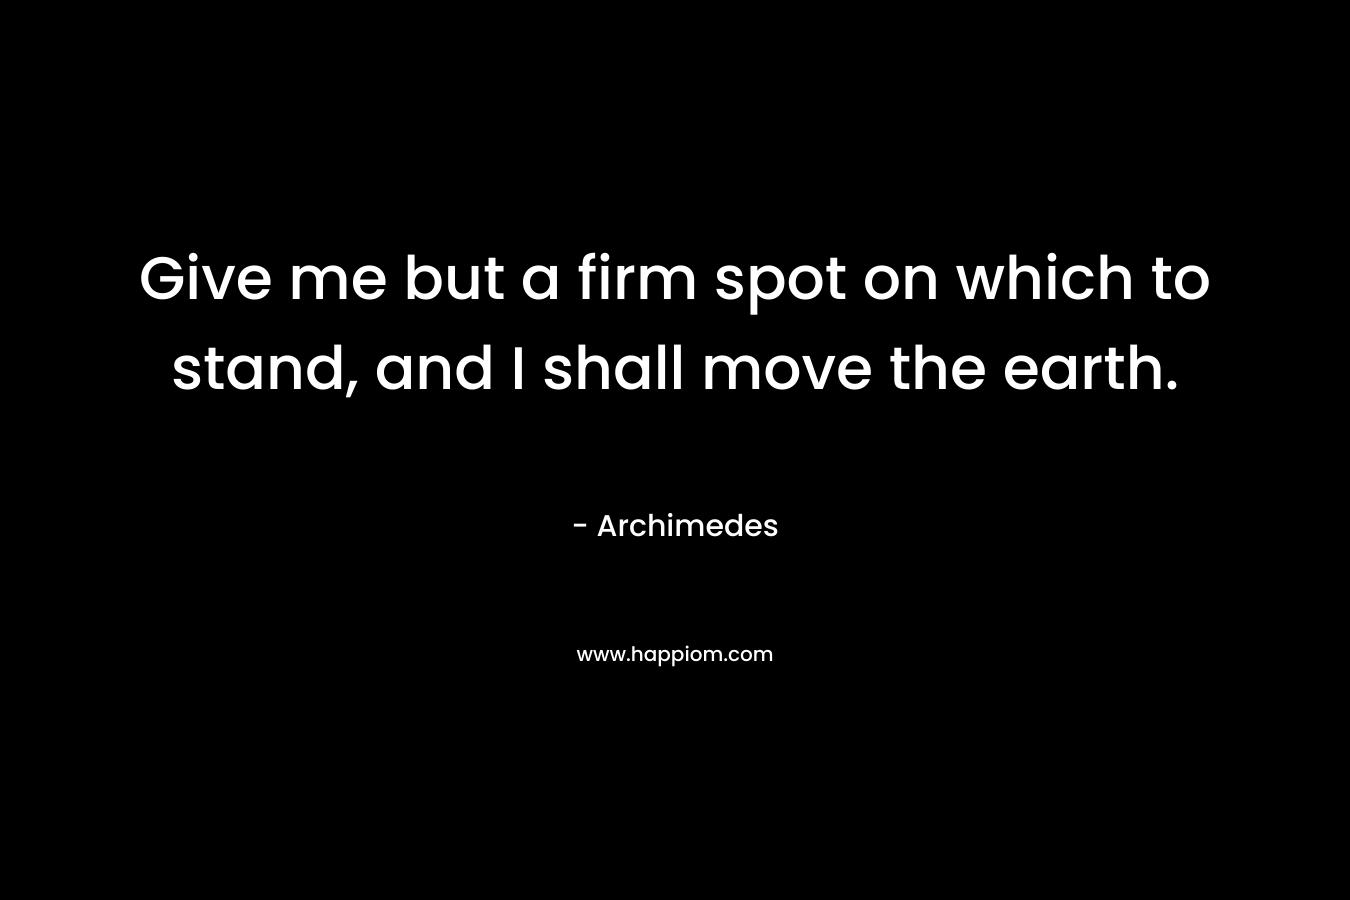 Give me but a firm spot on which to stand, and I shall move the earth. – Archimedes